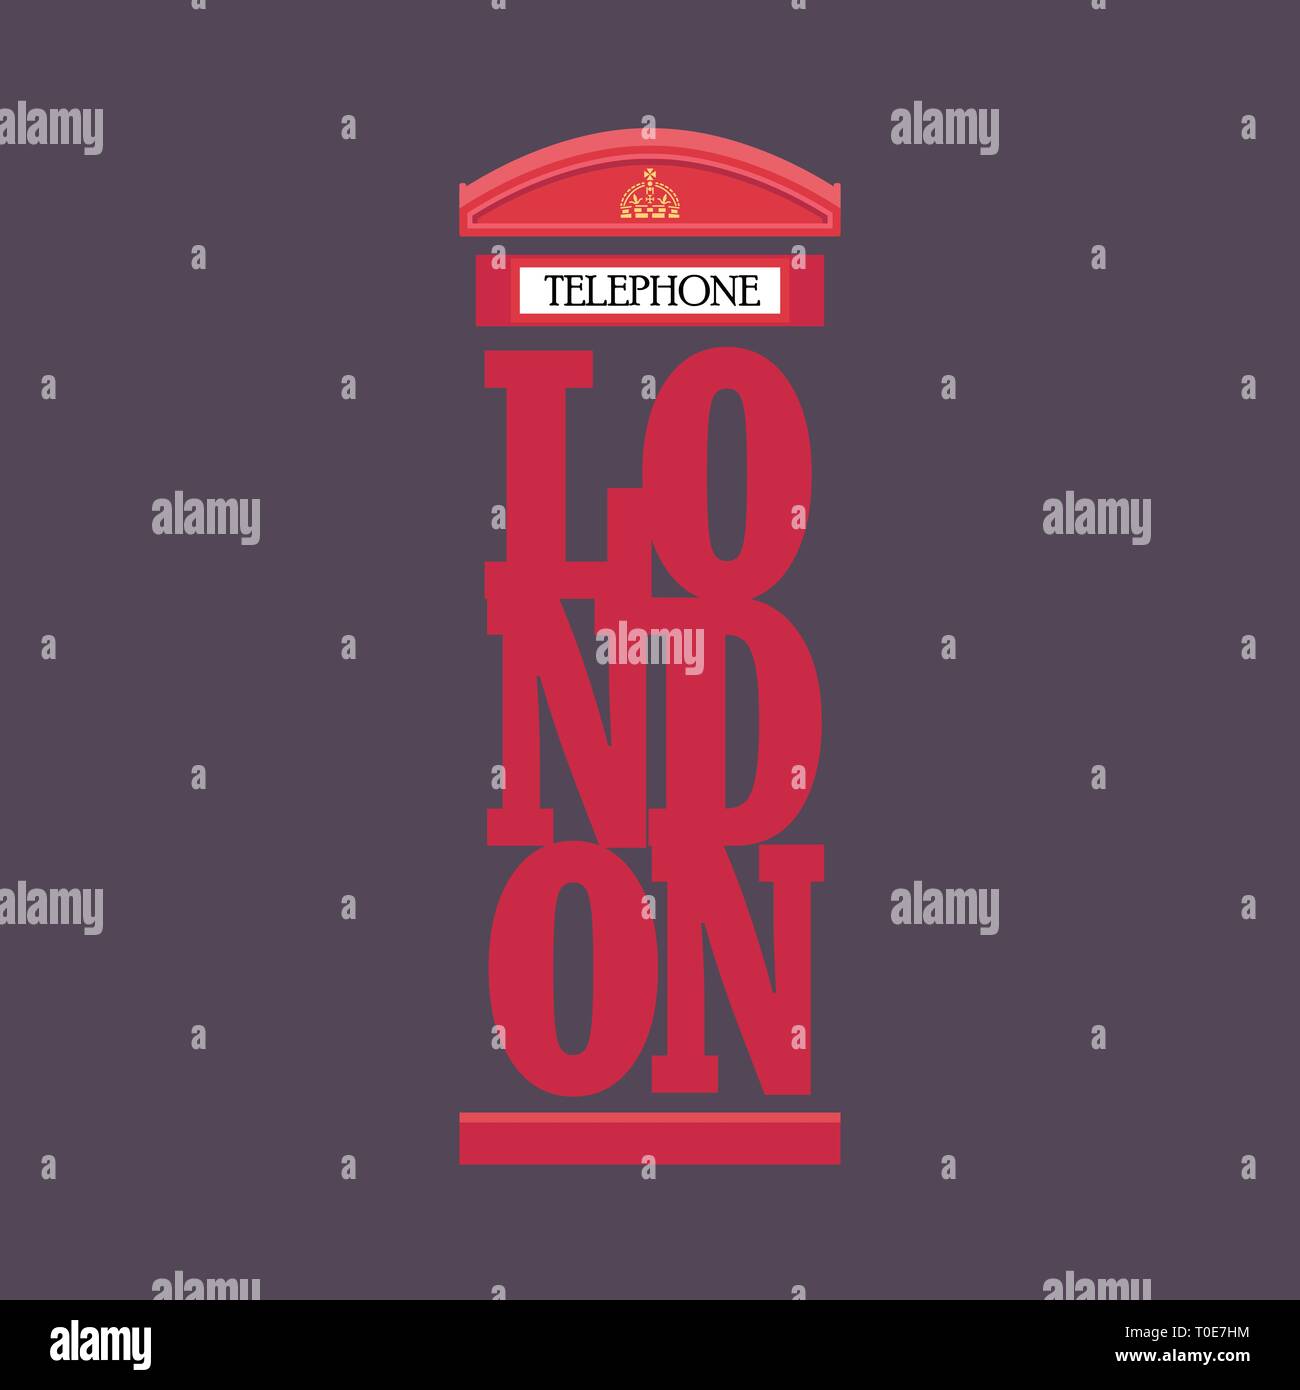 London red telephone booth poster design. Vector illustration. Stock Vector